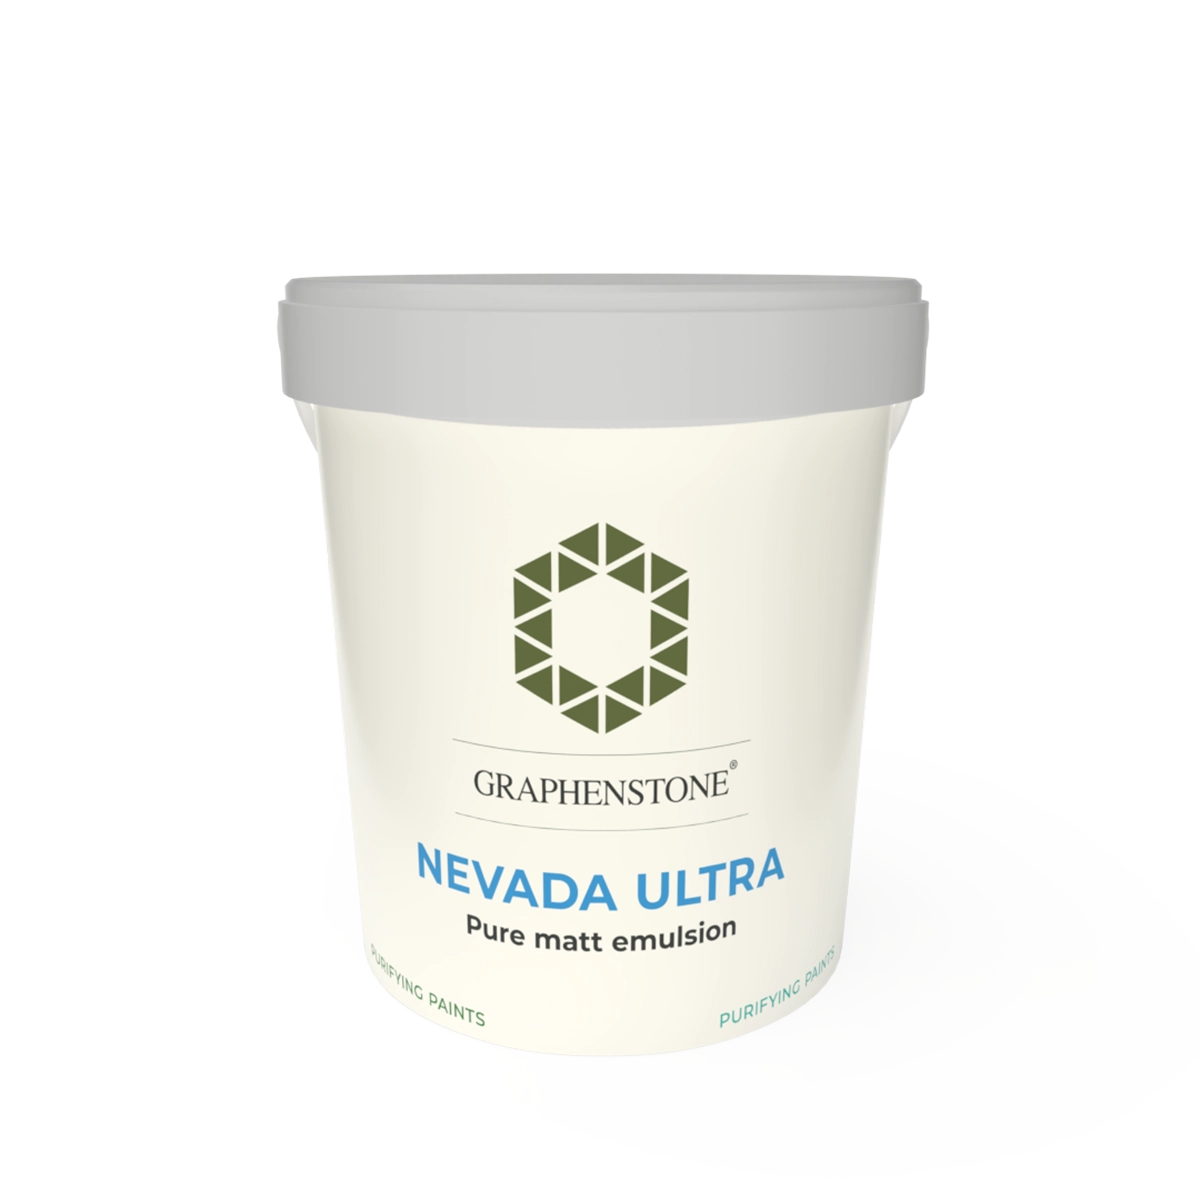 Nevada Ultra Colour – The ultimate economical eco-friendly trade paint, perfect for ceilings and as 1st coats on new plasters